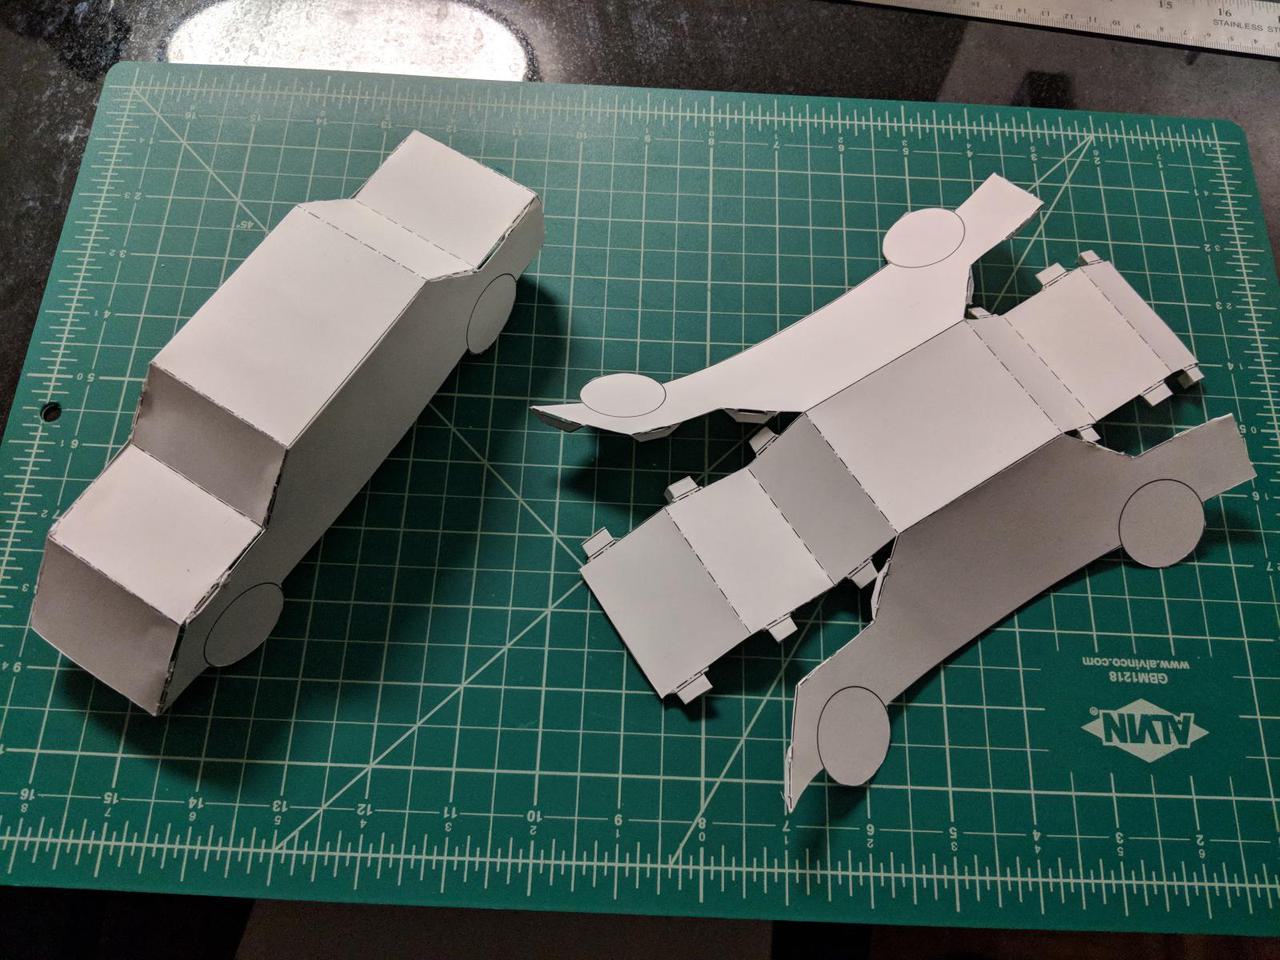 Two paper cars on a green cutting mat. One is assembled and the other is waiting to be assembled. Both are made of white paper.